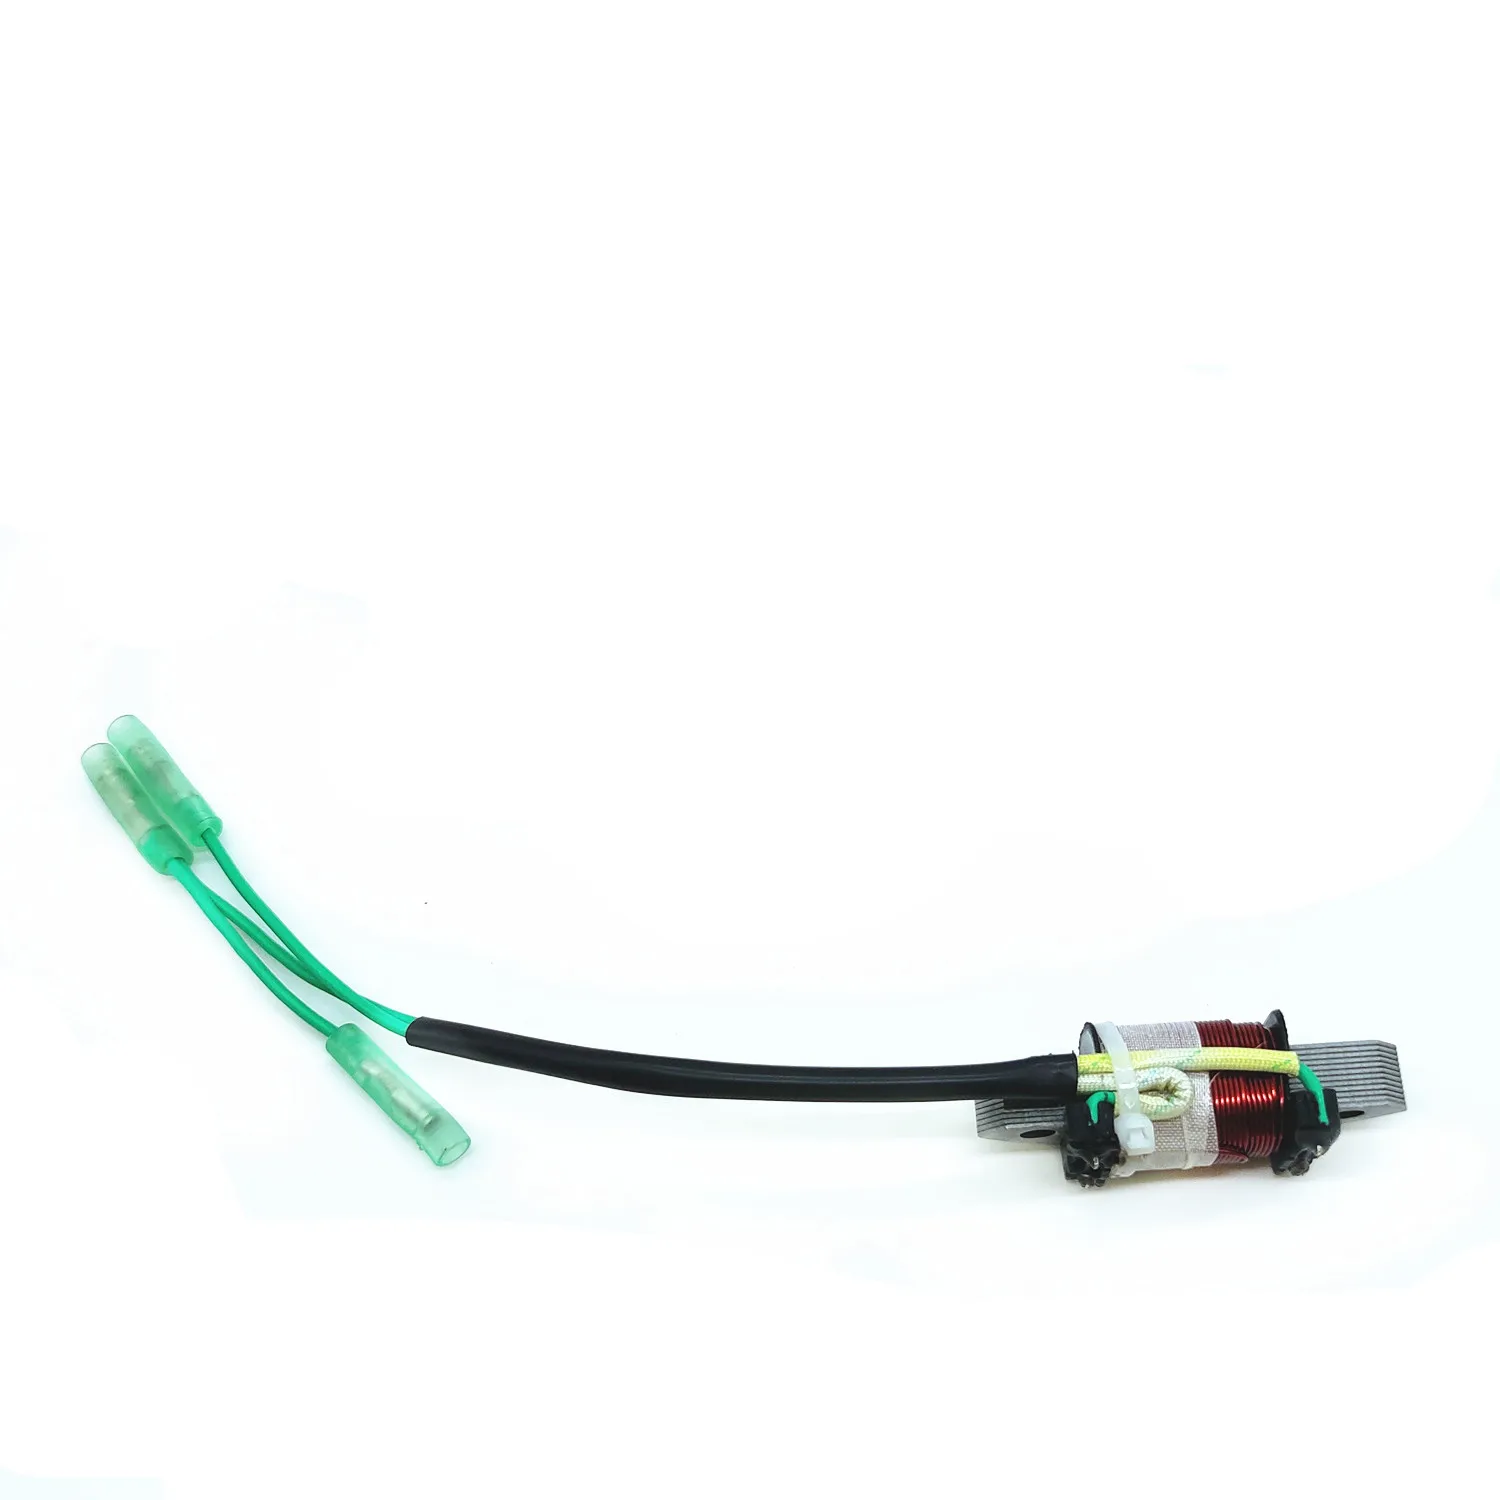 Lighting Coil for Yamaha Outboard 66M-85533-10-00/63D-85533-00-00/68T-85533-10-00 8/9.9/15/40/50HP(1995-2006)